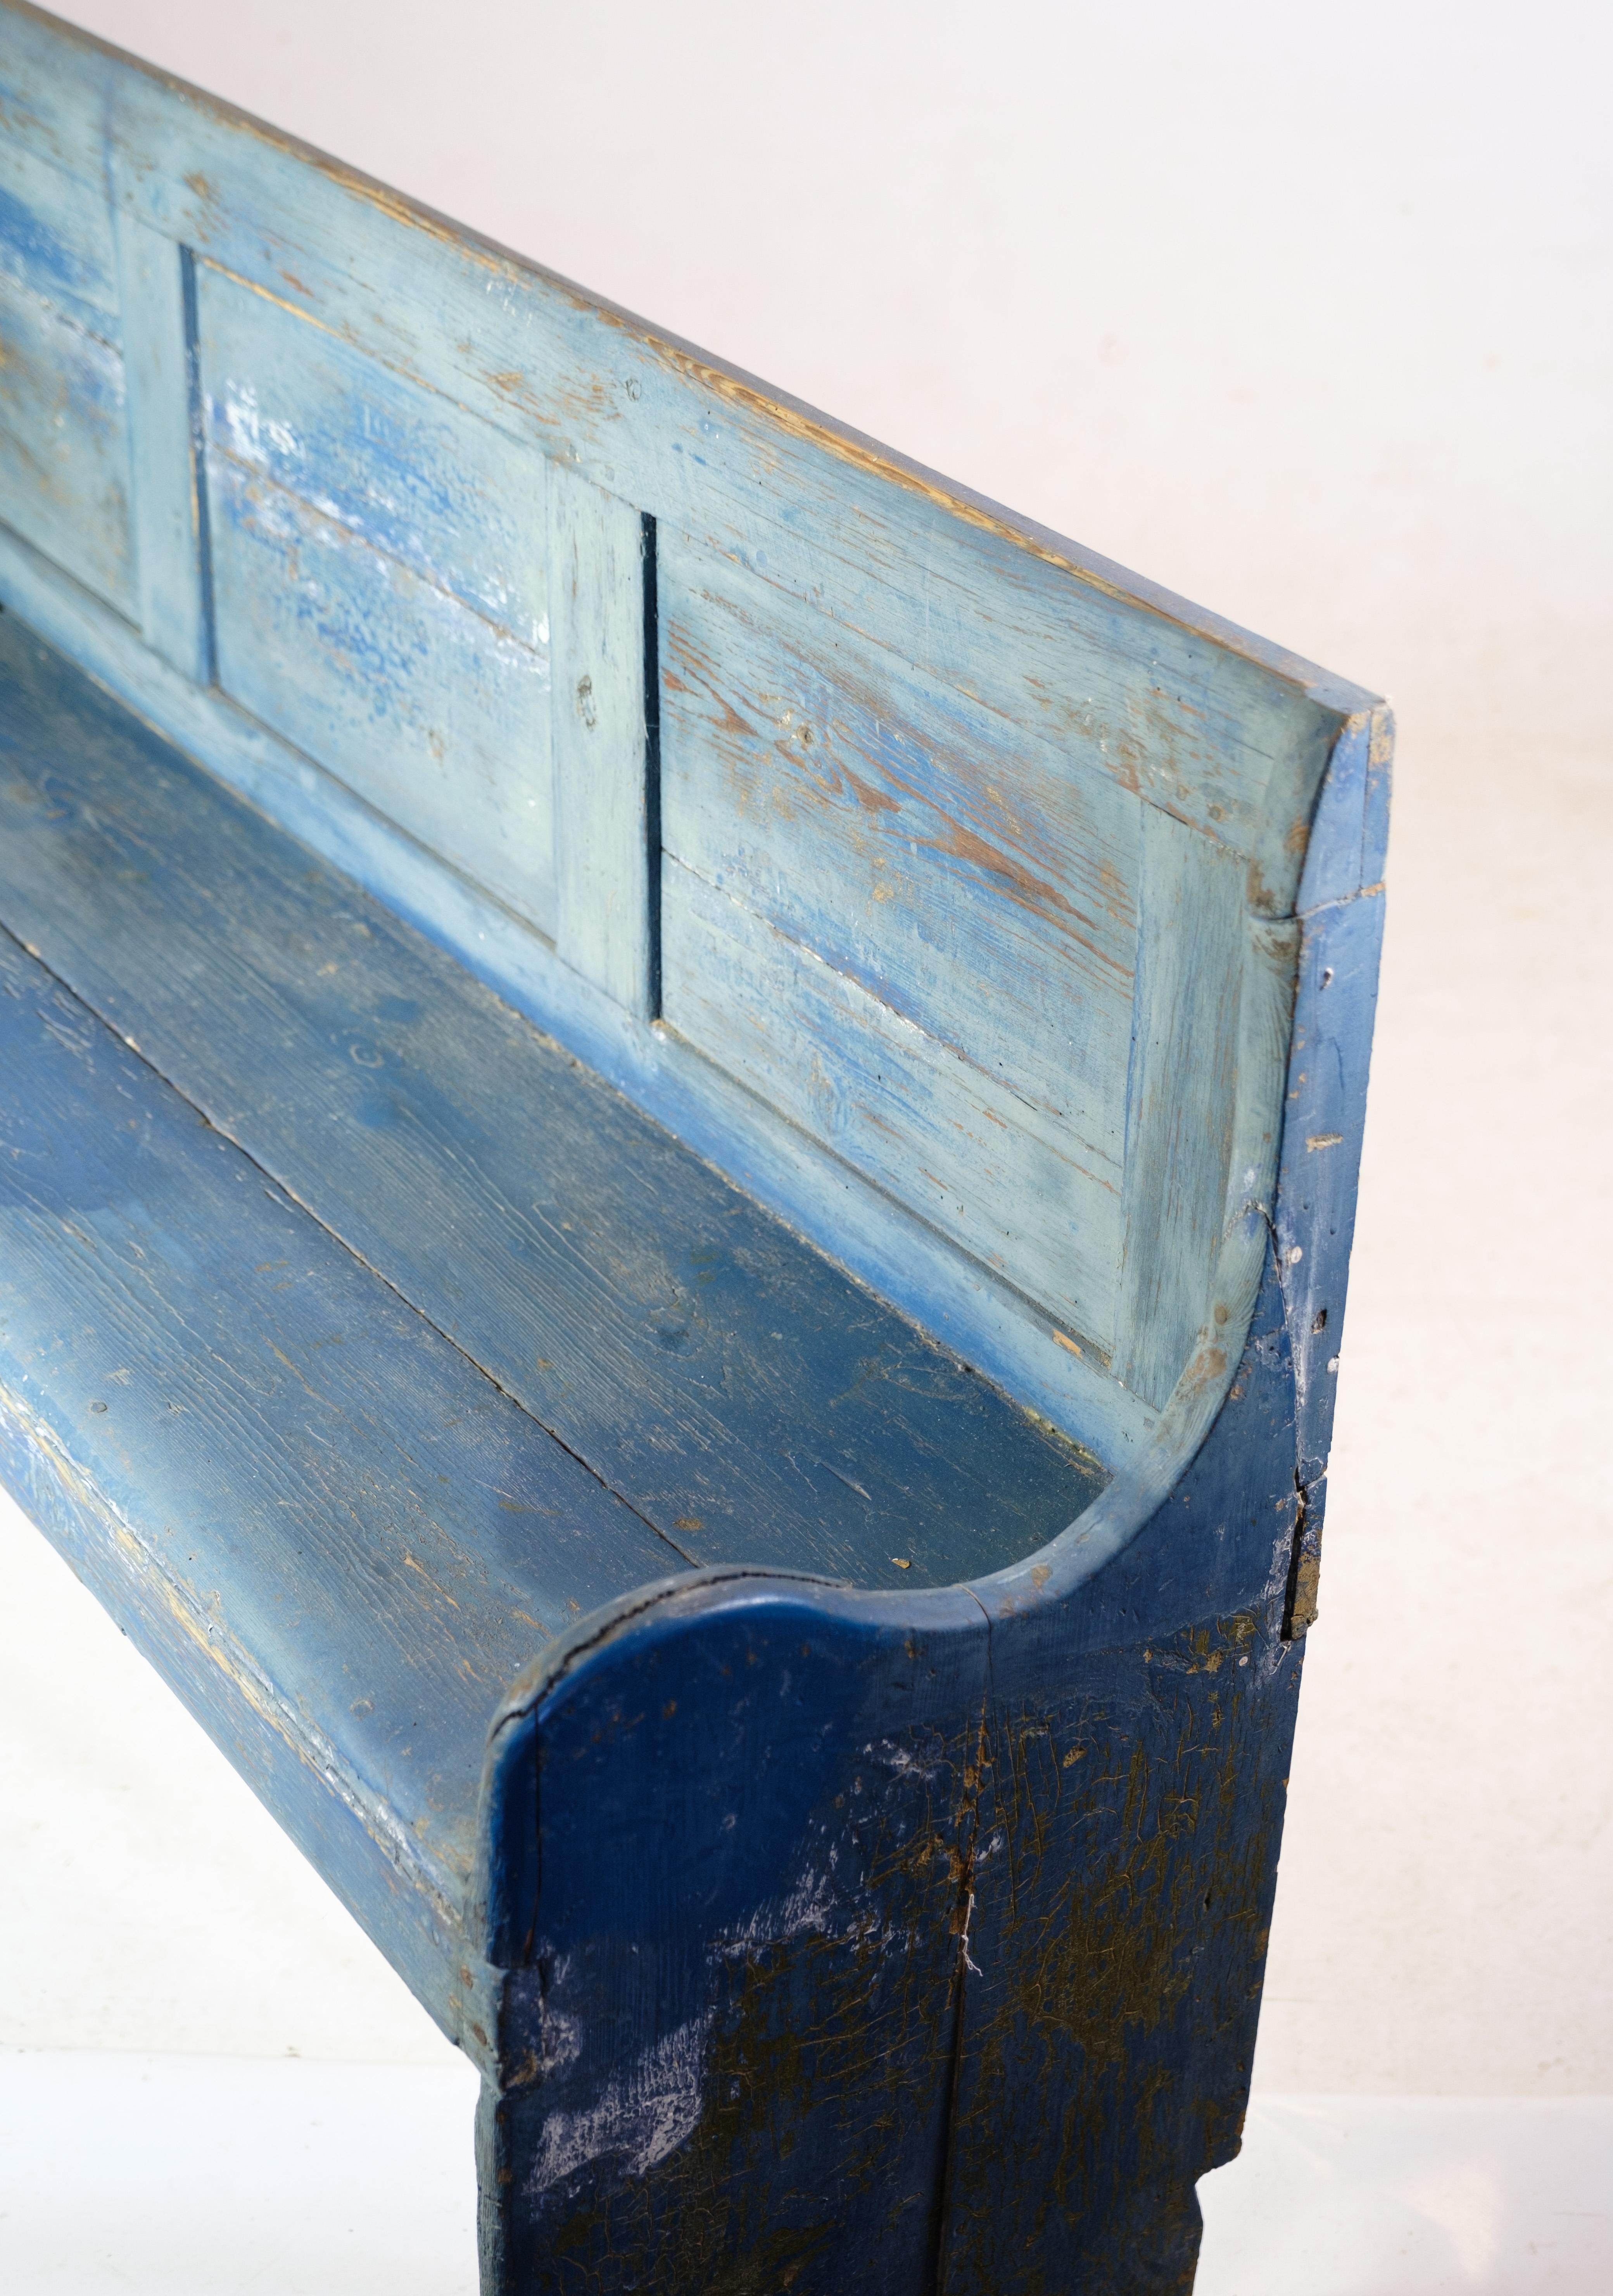 Danish Original Blue Painted Pine Wood Bench from the 1840s For Sale